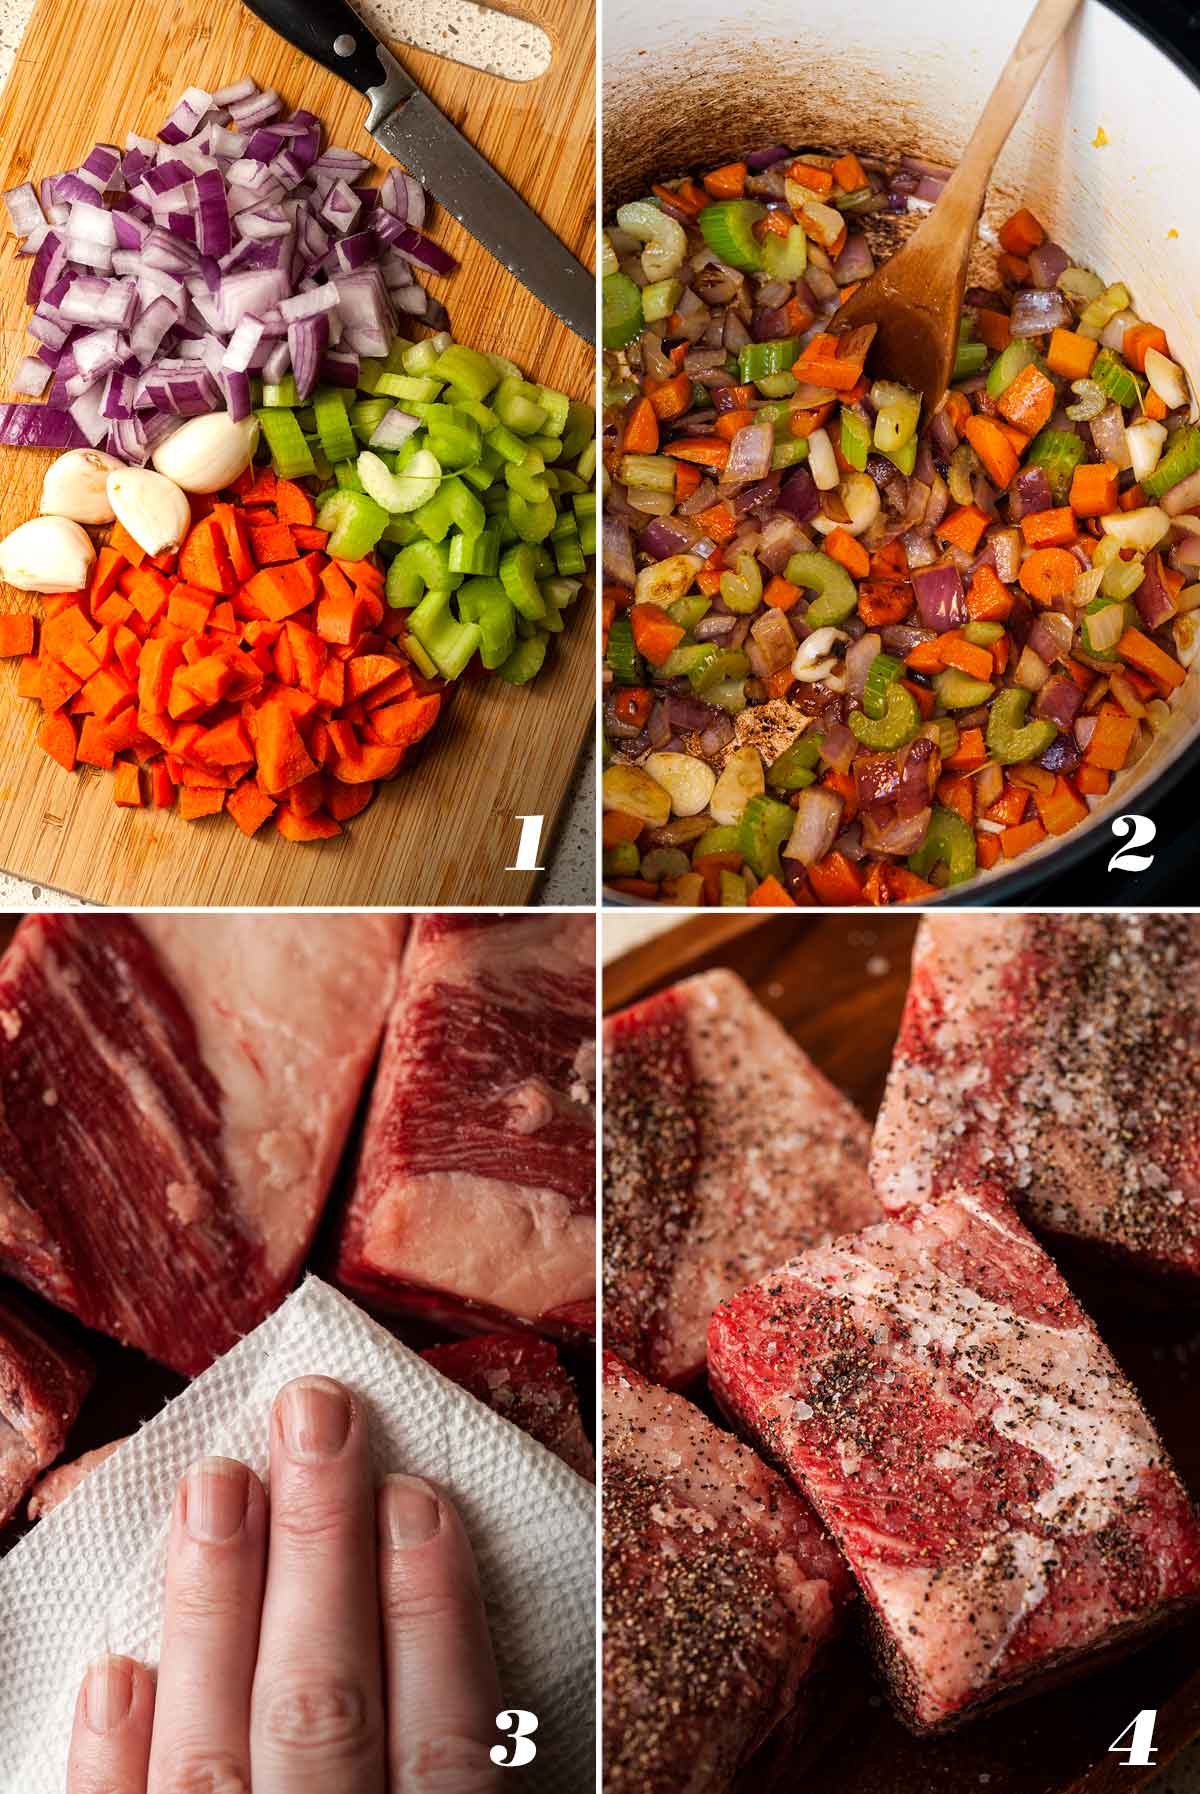 A collage of 4 numbered images showing how to prep ingredients for braised short ribs.